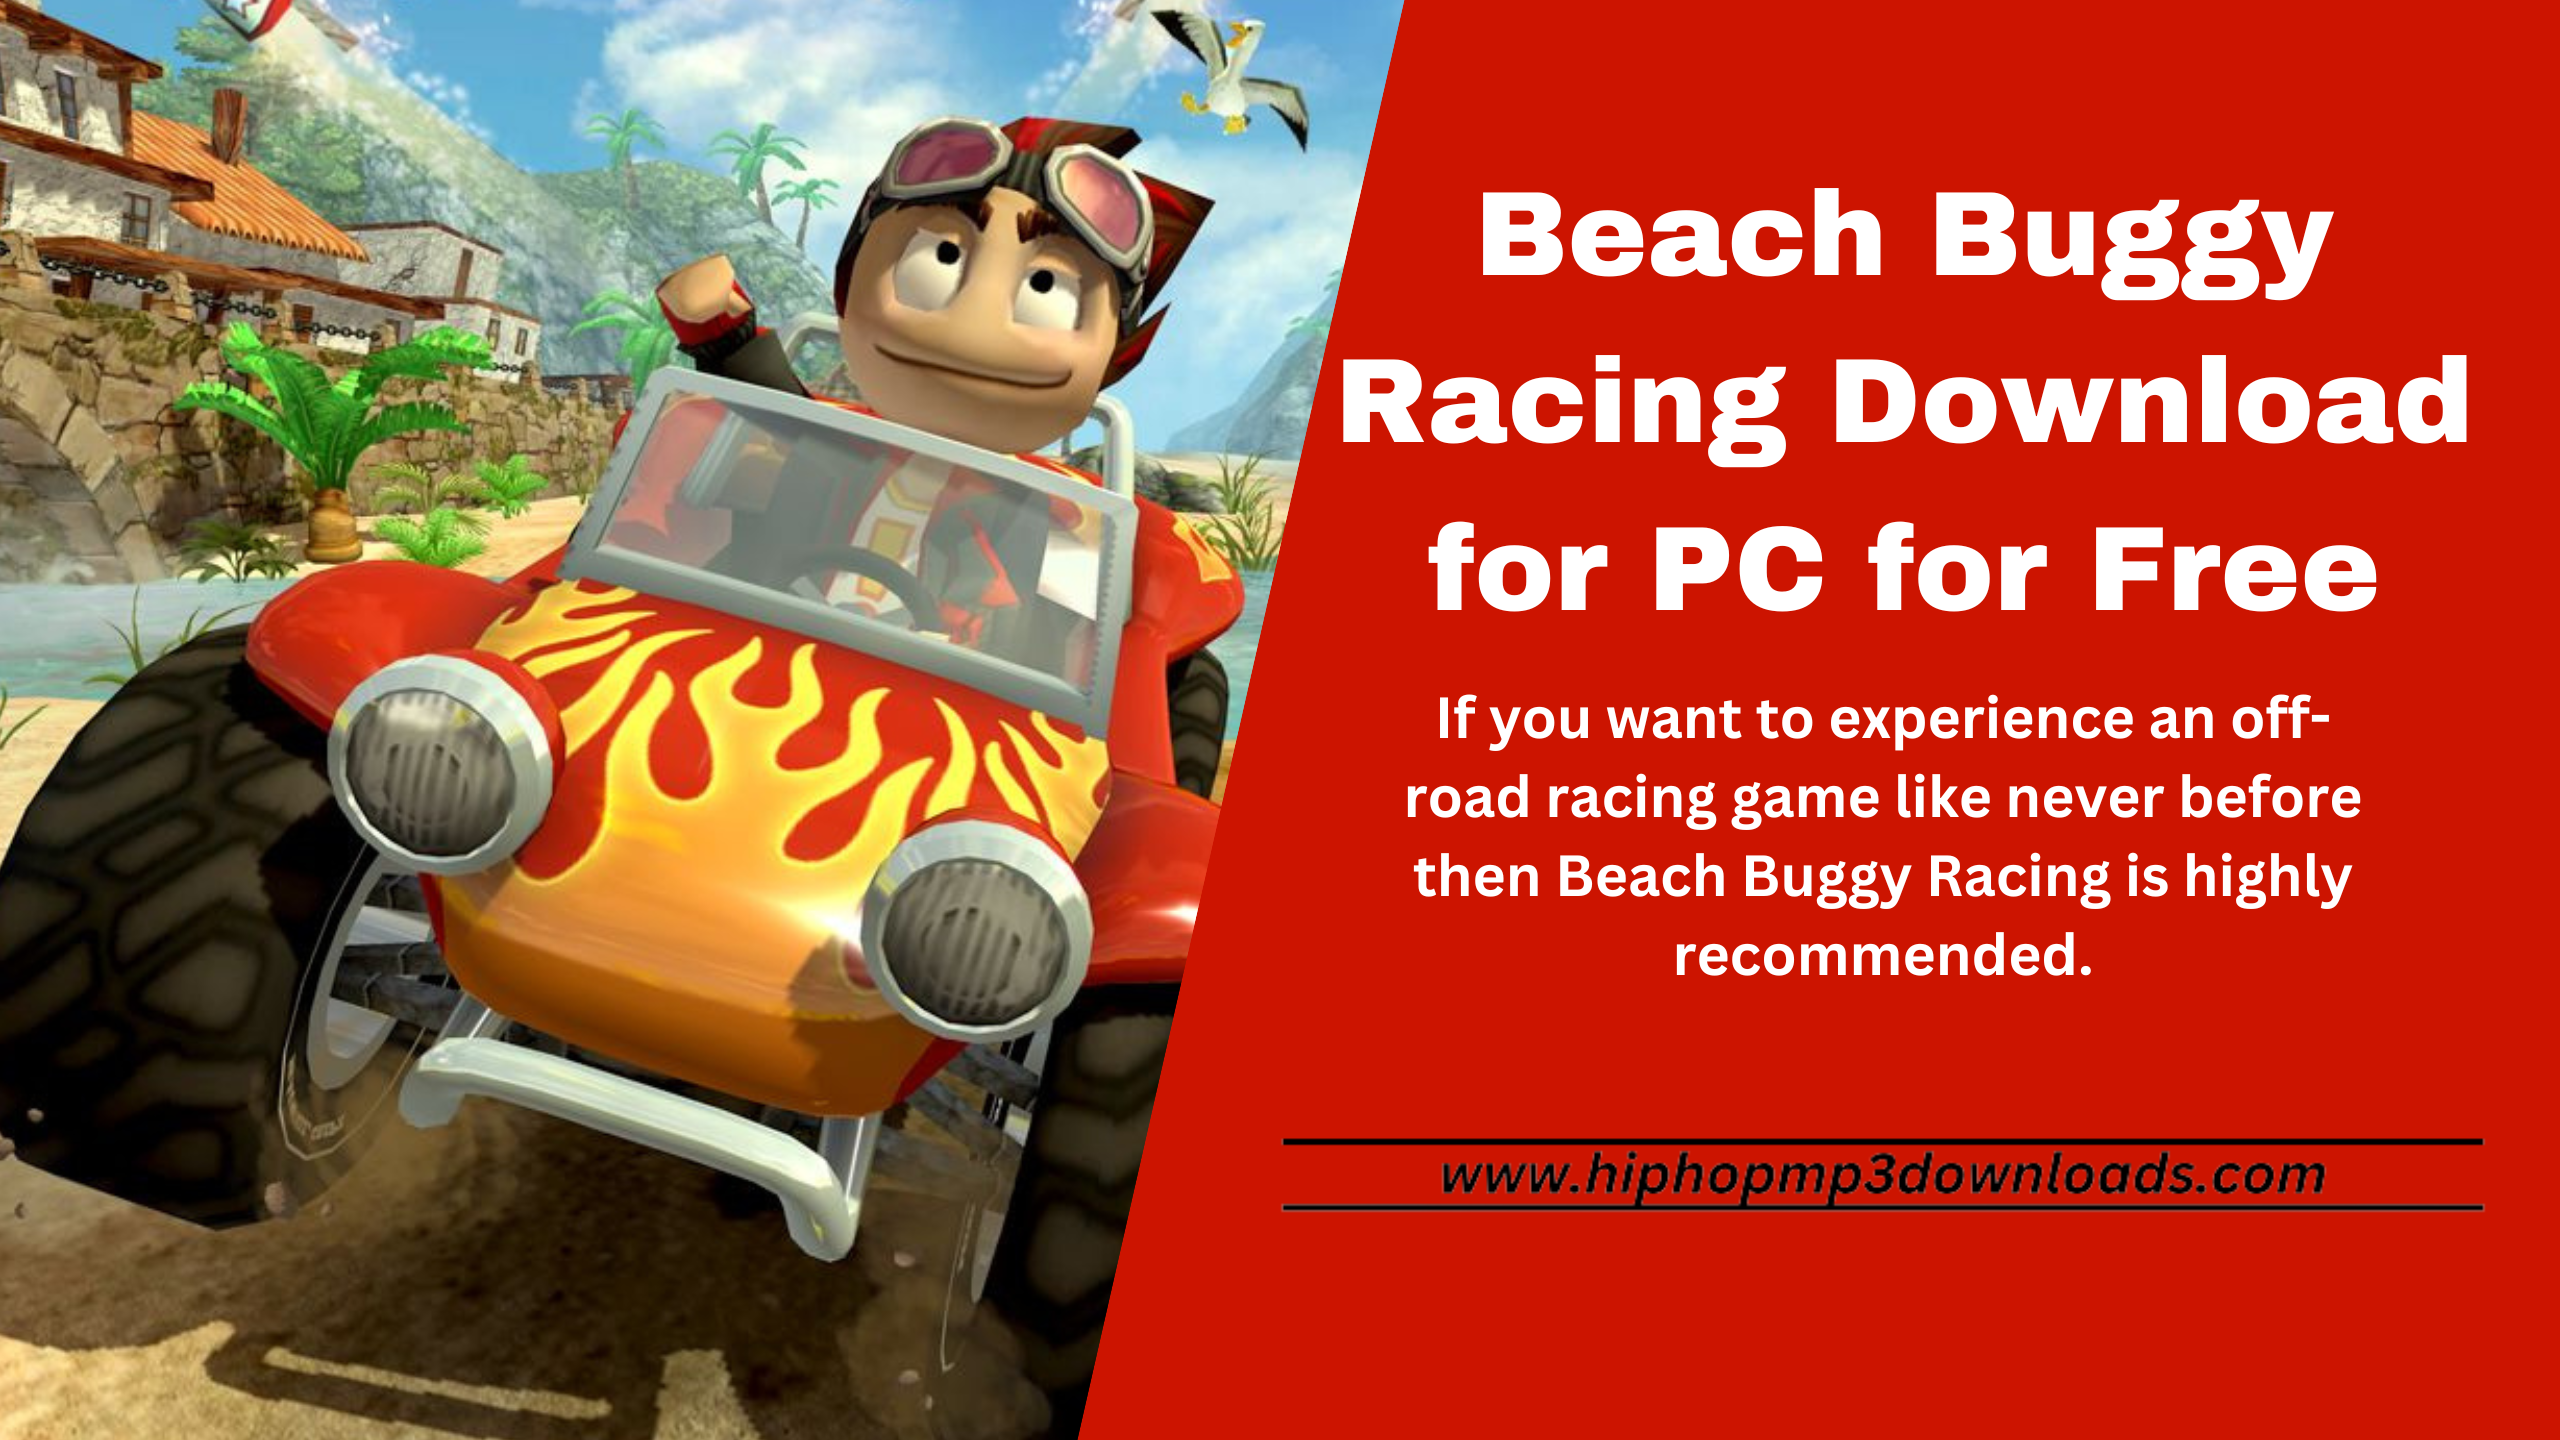 Beach Buggy Racing Download for PC for Free